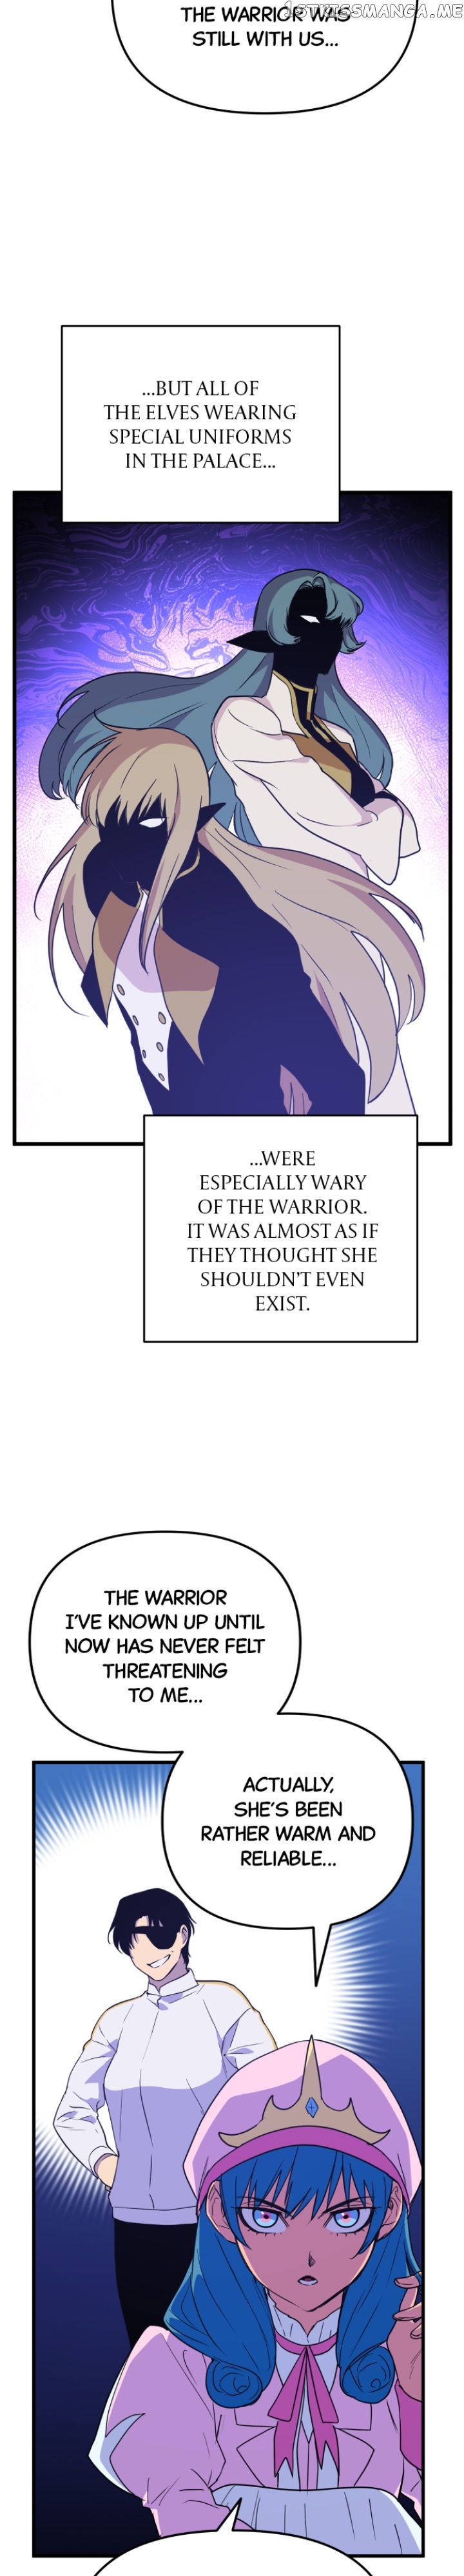 The Warrior From the Golden Days chapter 96 page 7